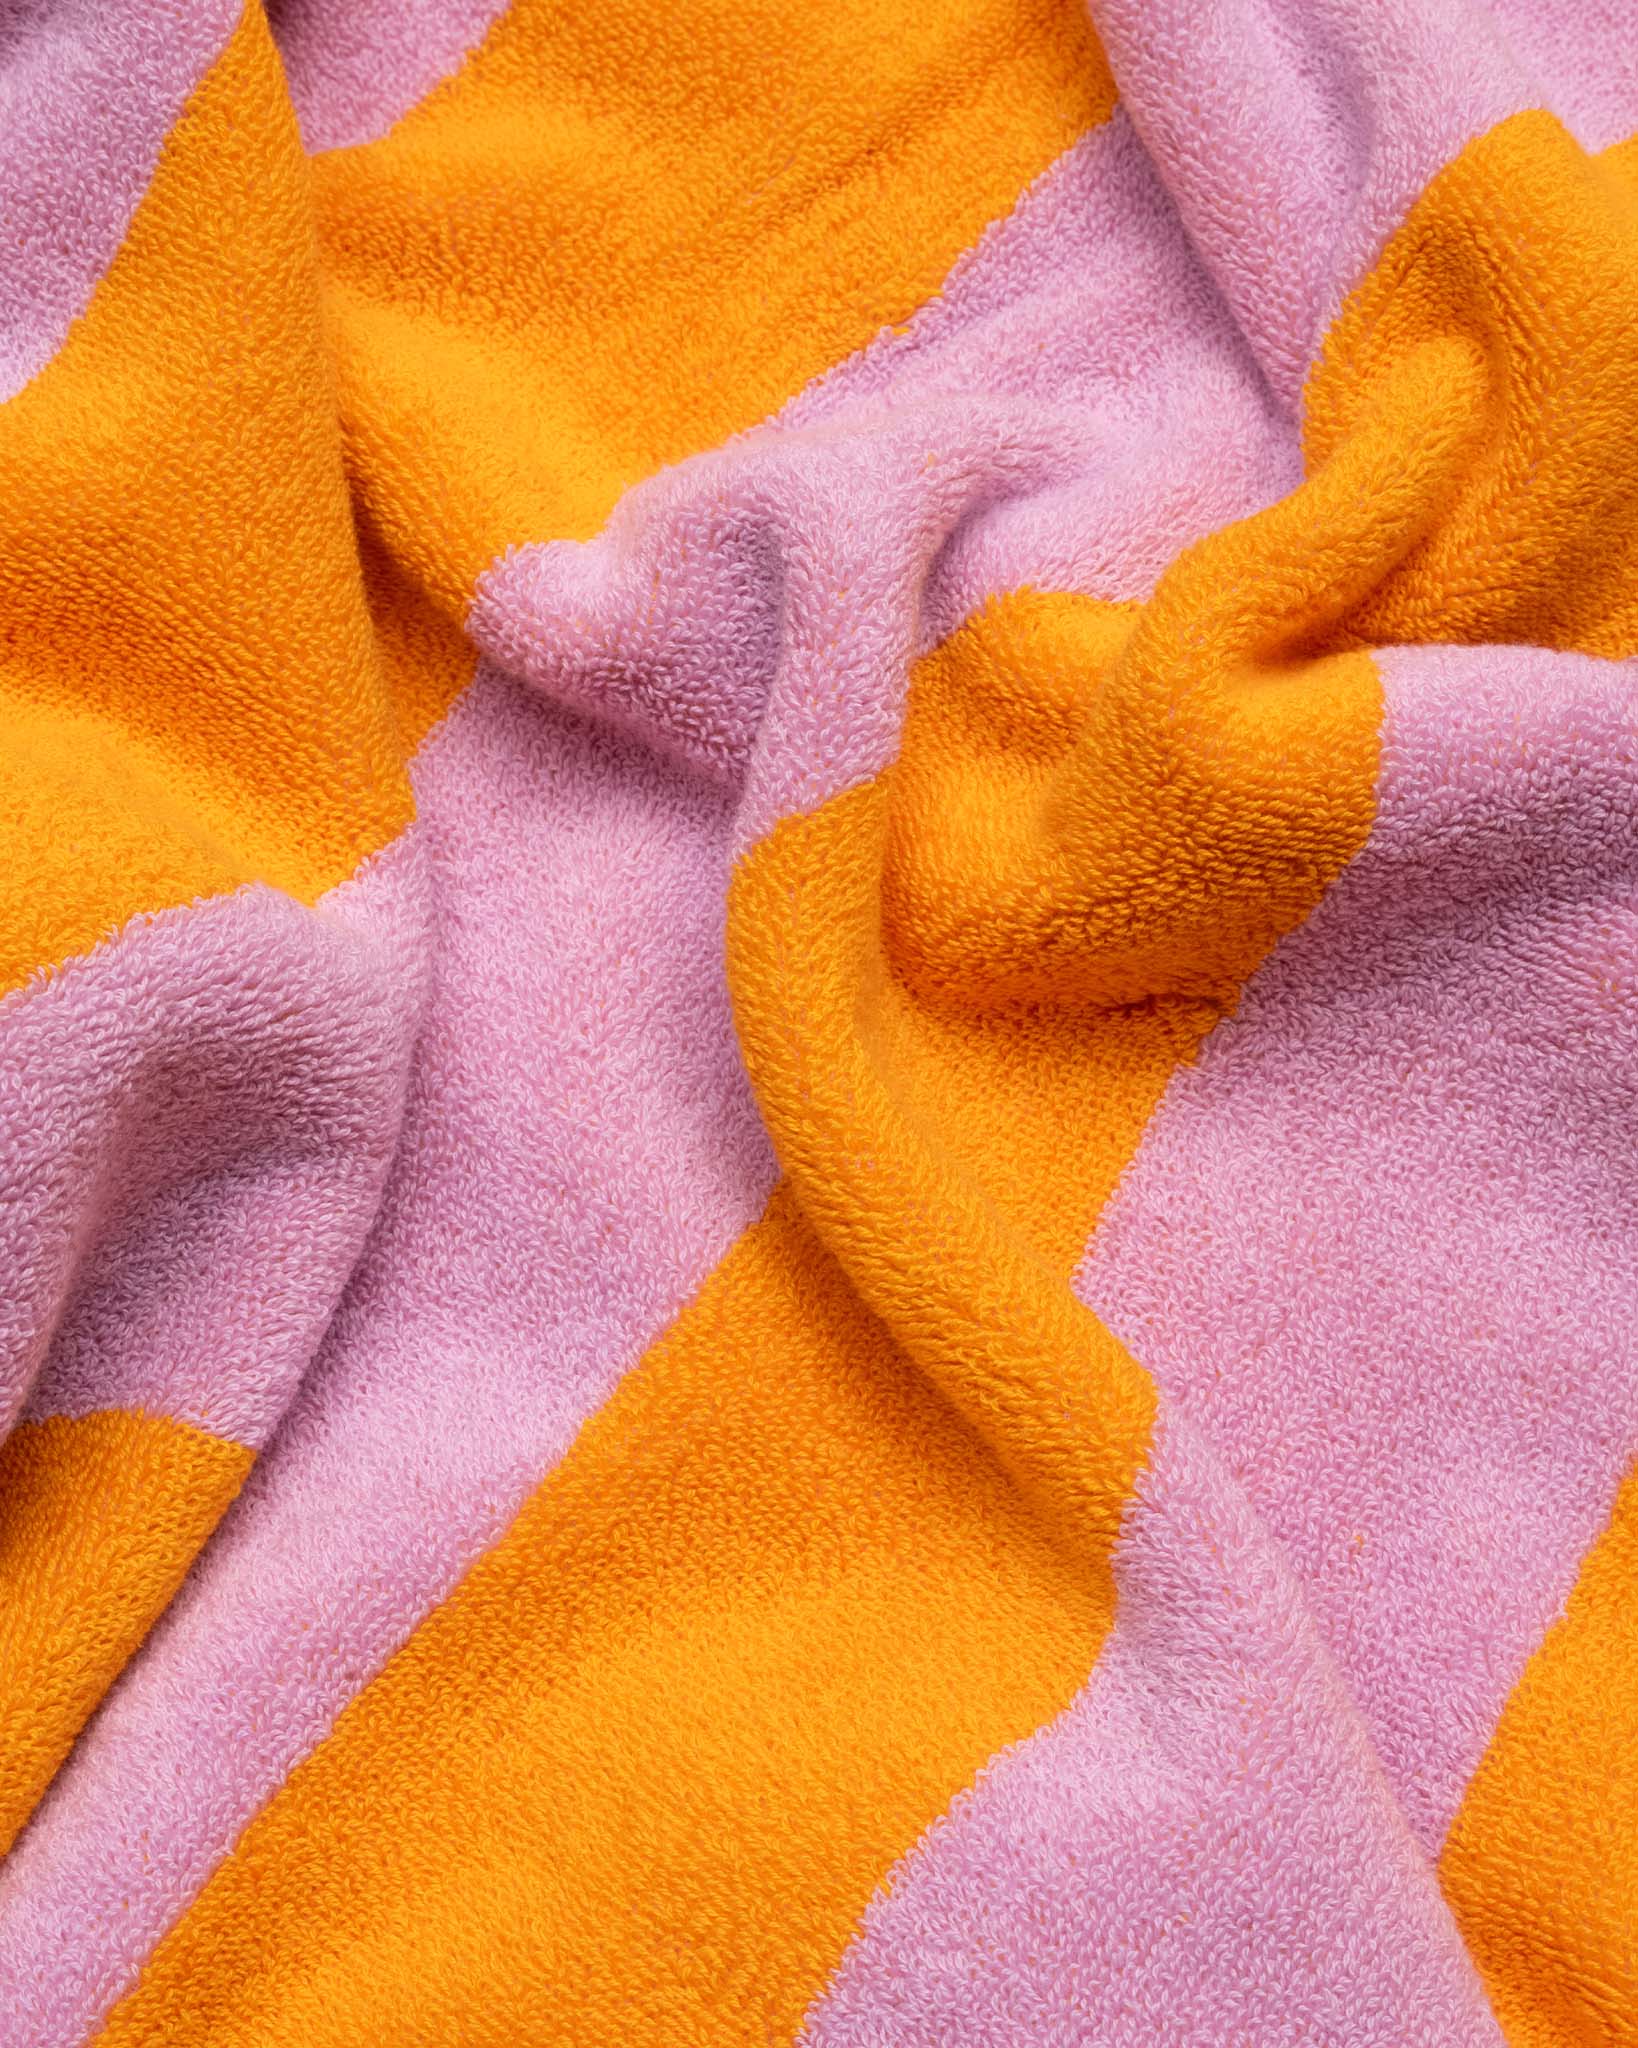 A wrinkled pink and orange striped towel. 